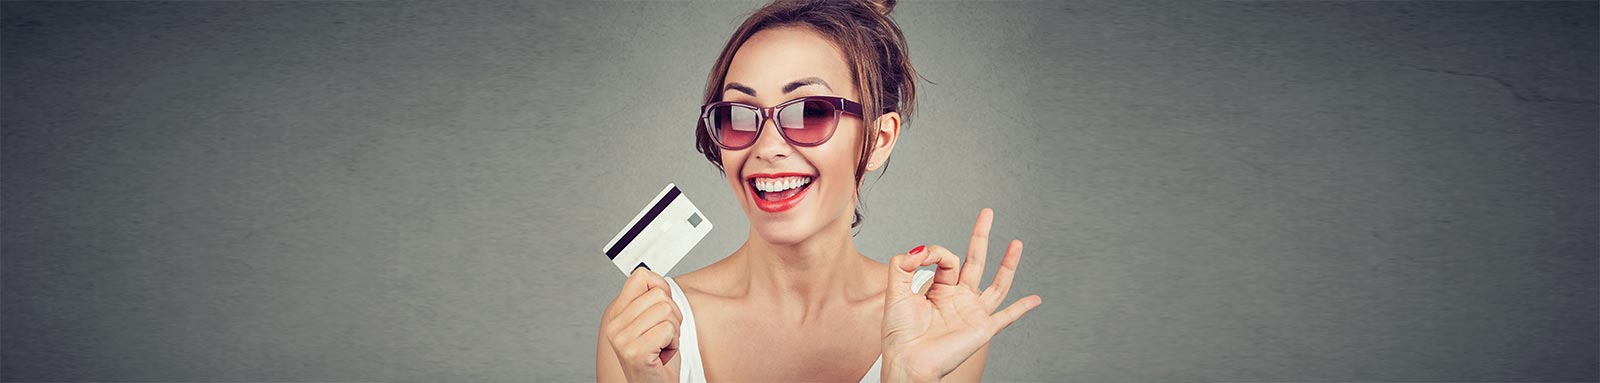 Woman wearing sunglasses with credit card smiling